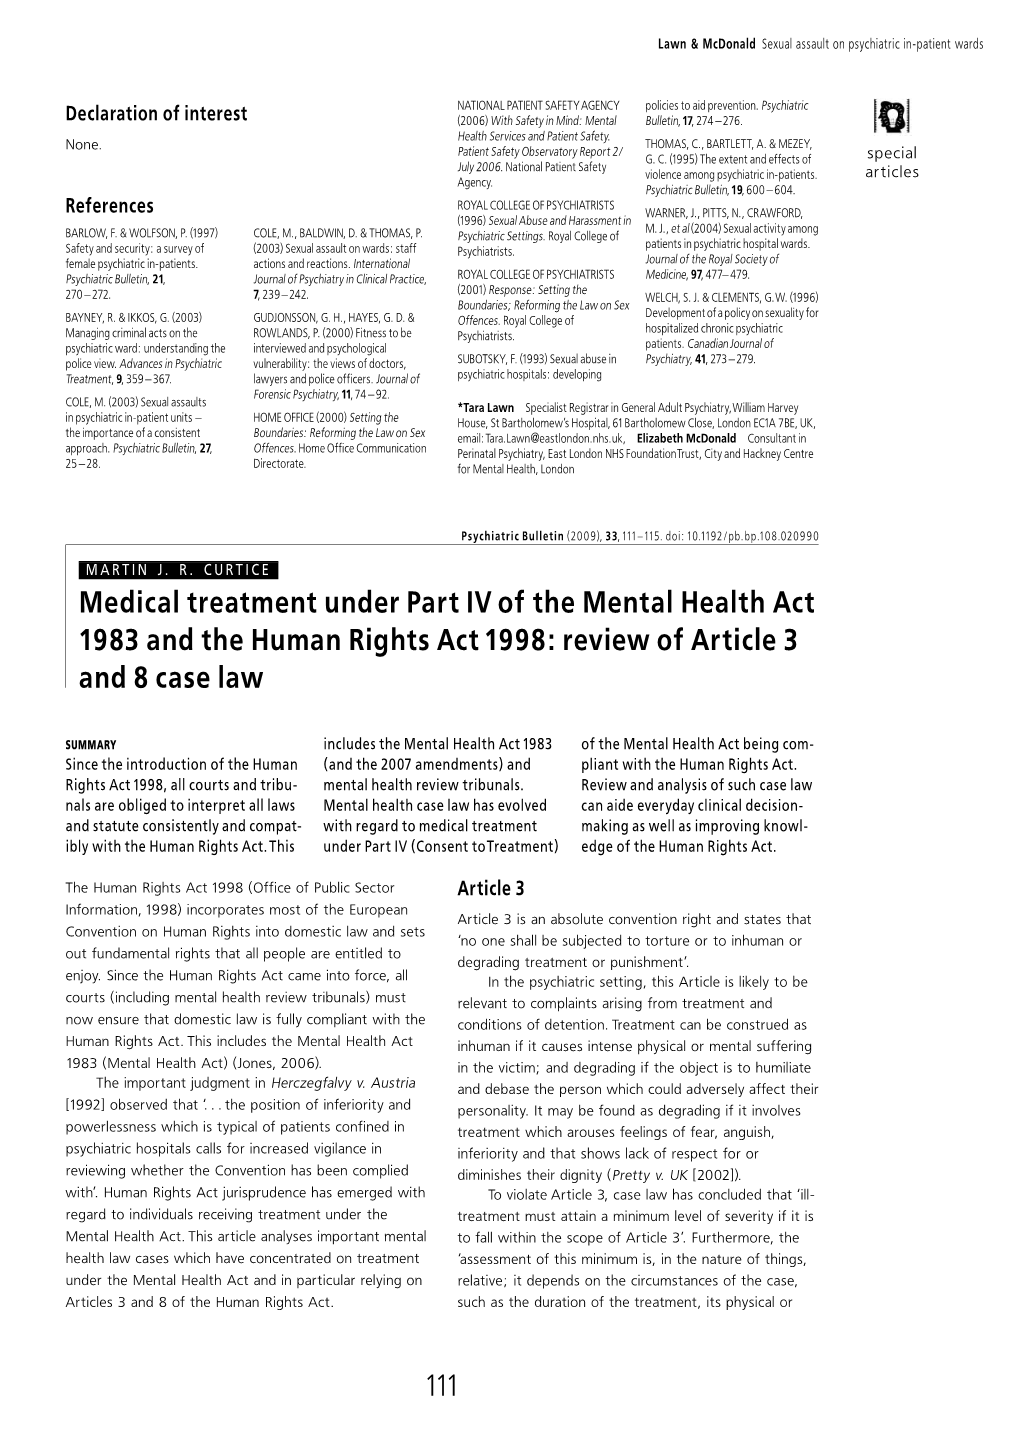 Medical Treatment Under Part IV of the Mental Health Act 1983 and the Human Rights Act 1998: Review of Article 3 and 8 Case Law